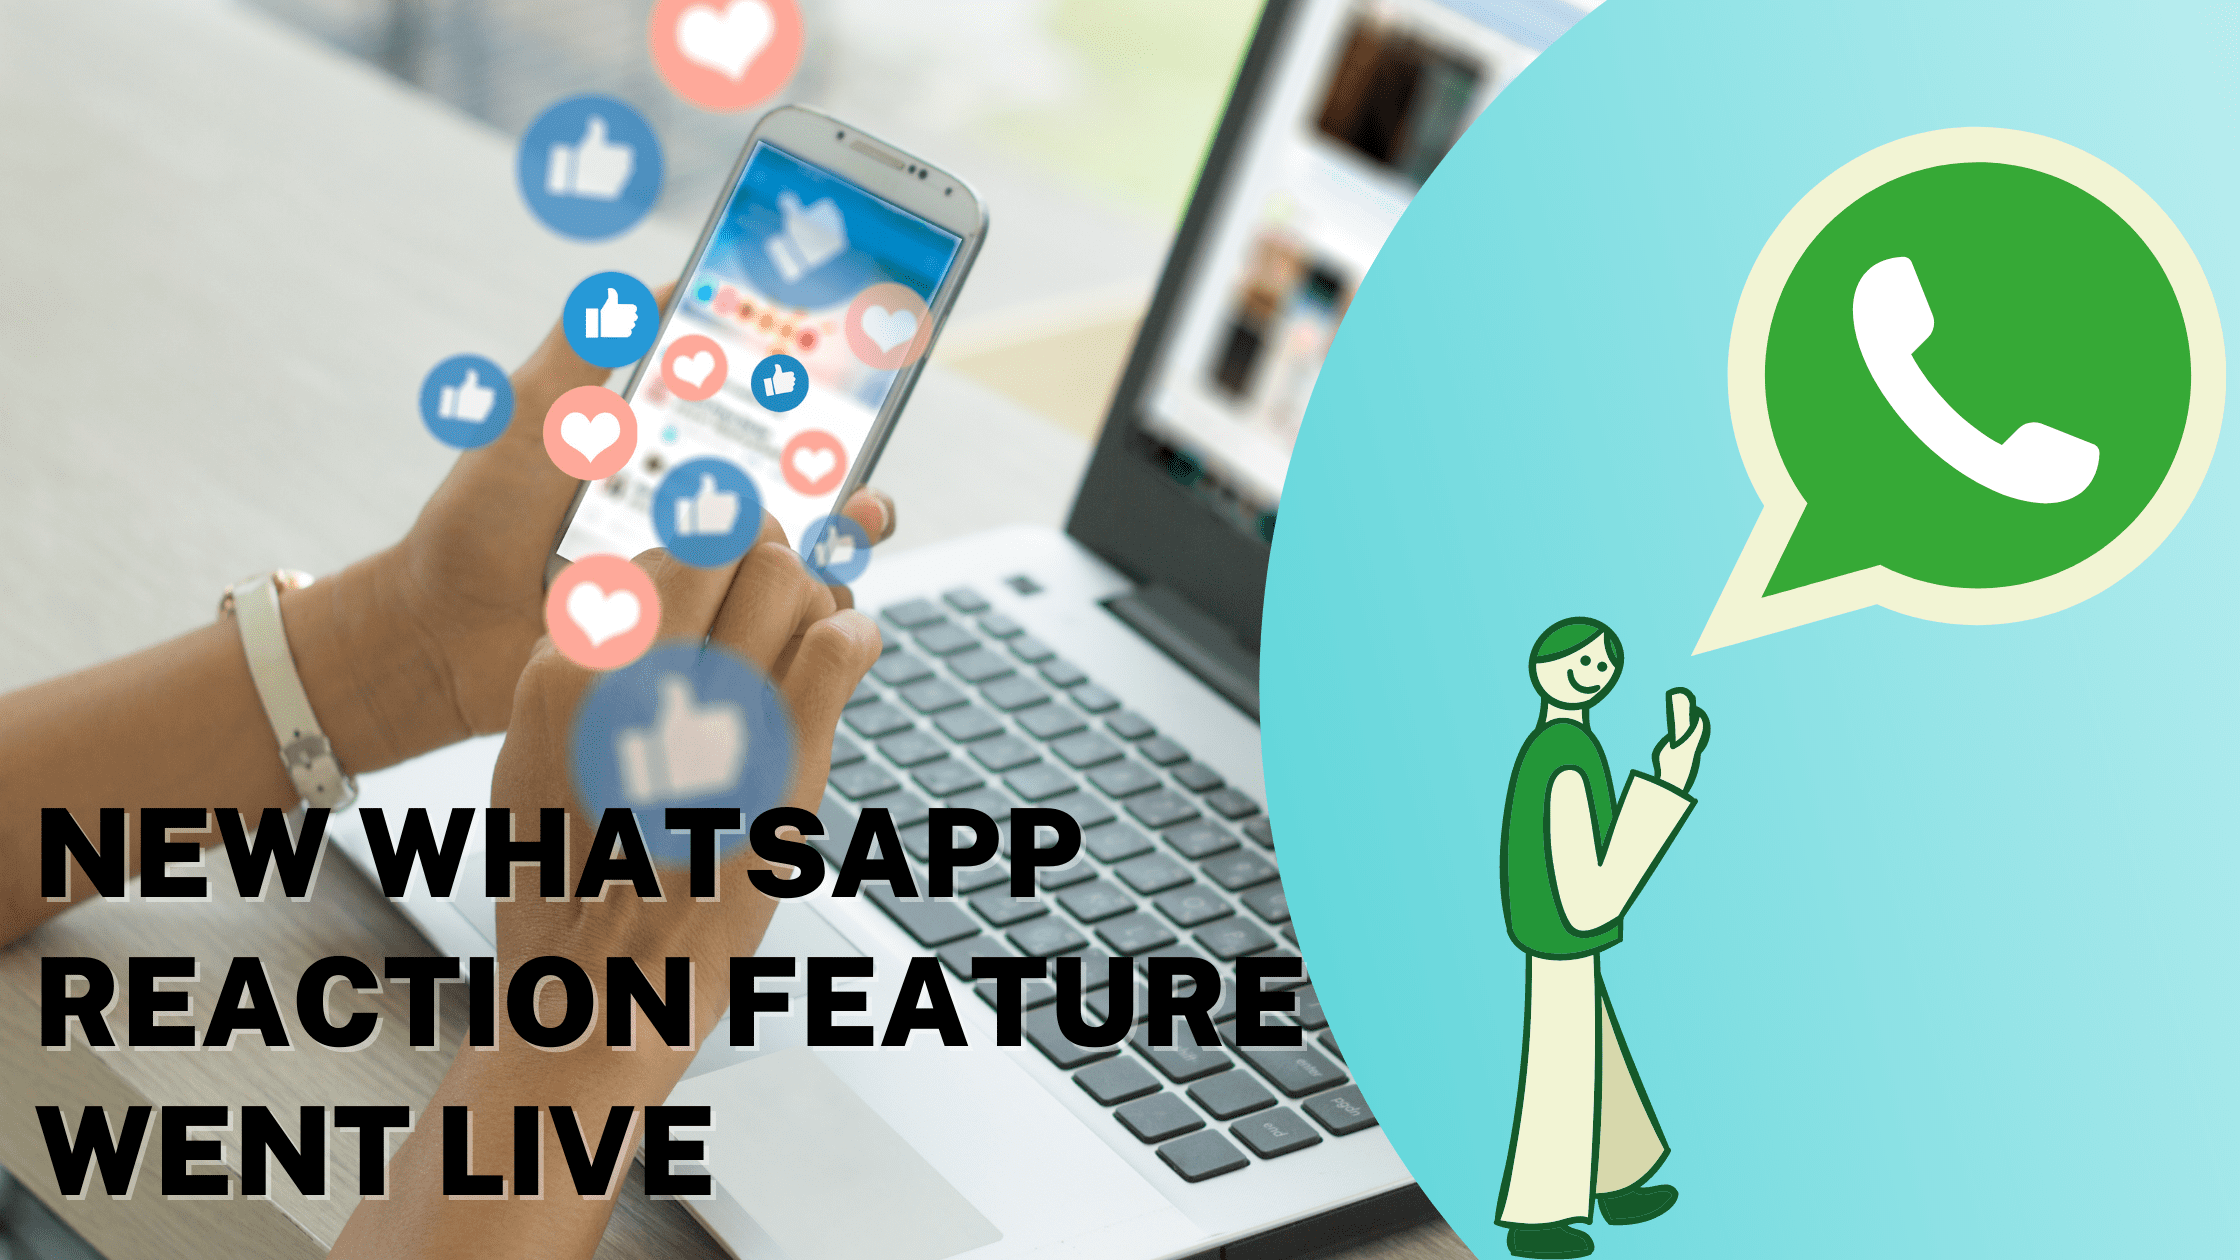 New WhatsApp reaction feature went live